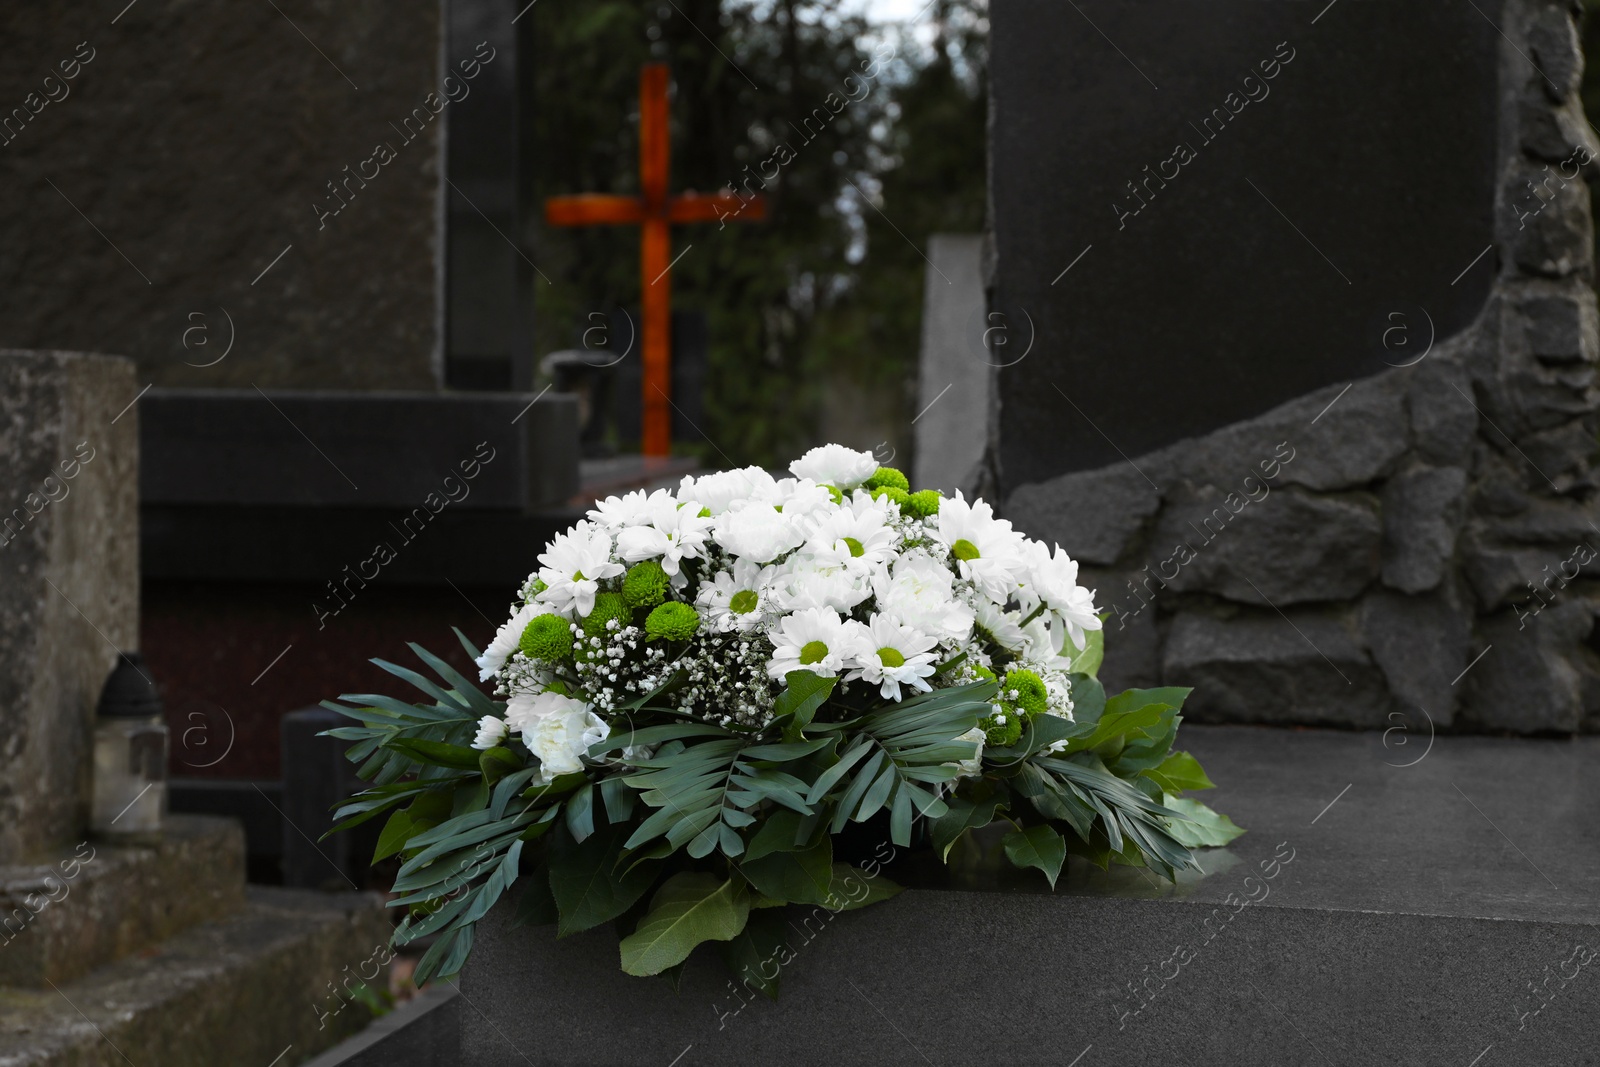 Photo of Funeral wreath of flowers on granite tombstone in cemetery